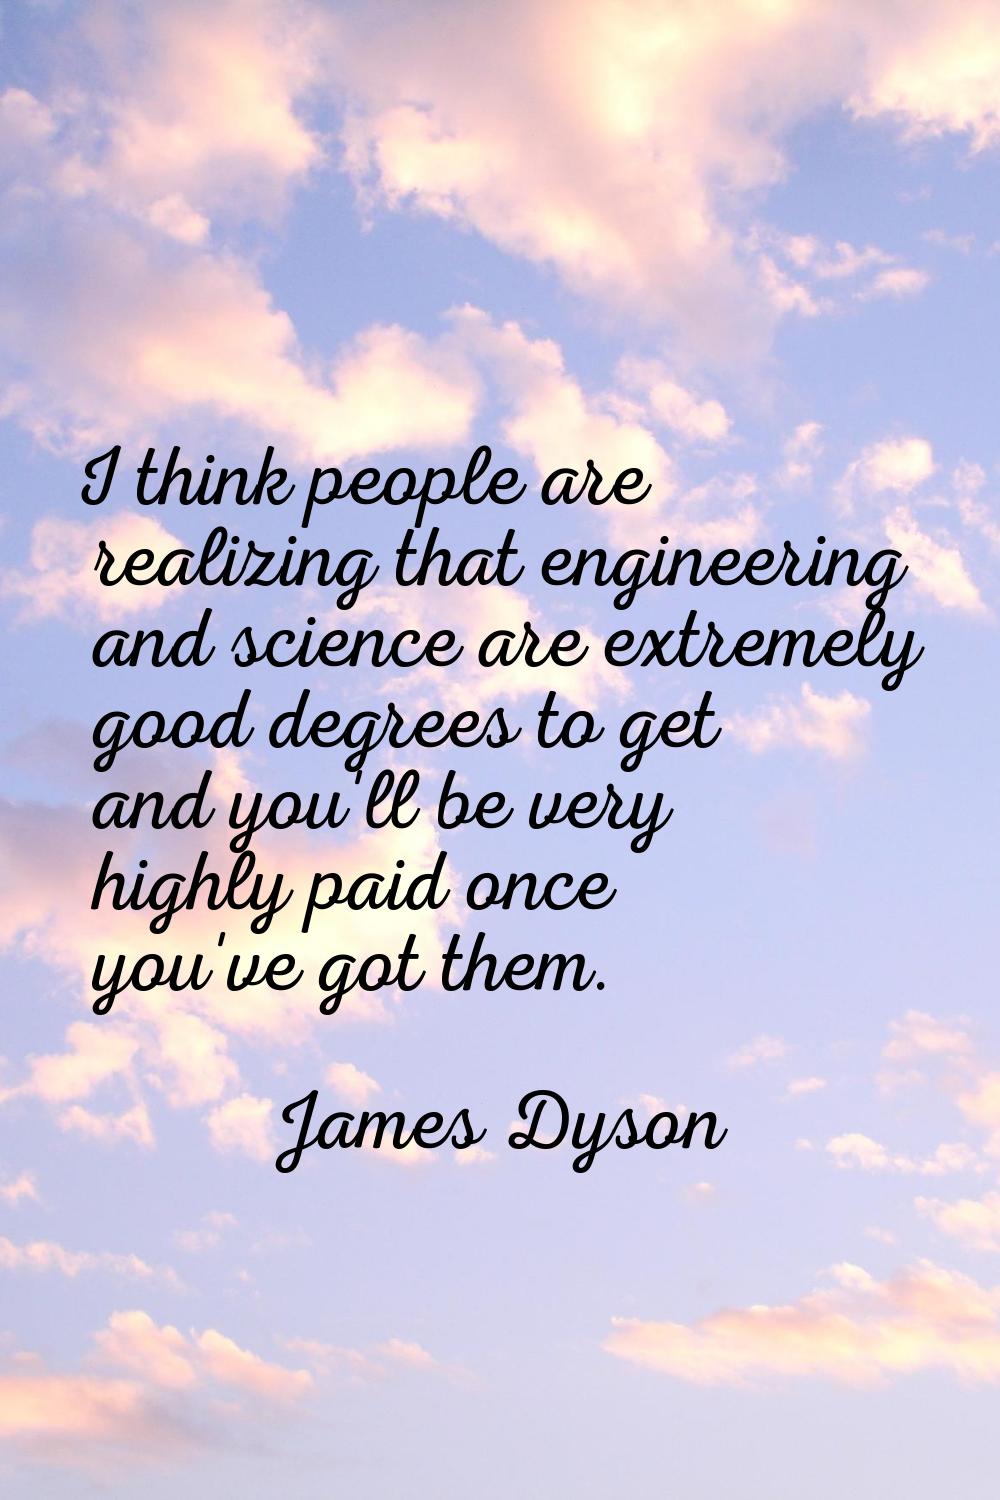 I think people are realizing that engineering and science are extremely good degrees to get and you